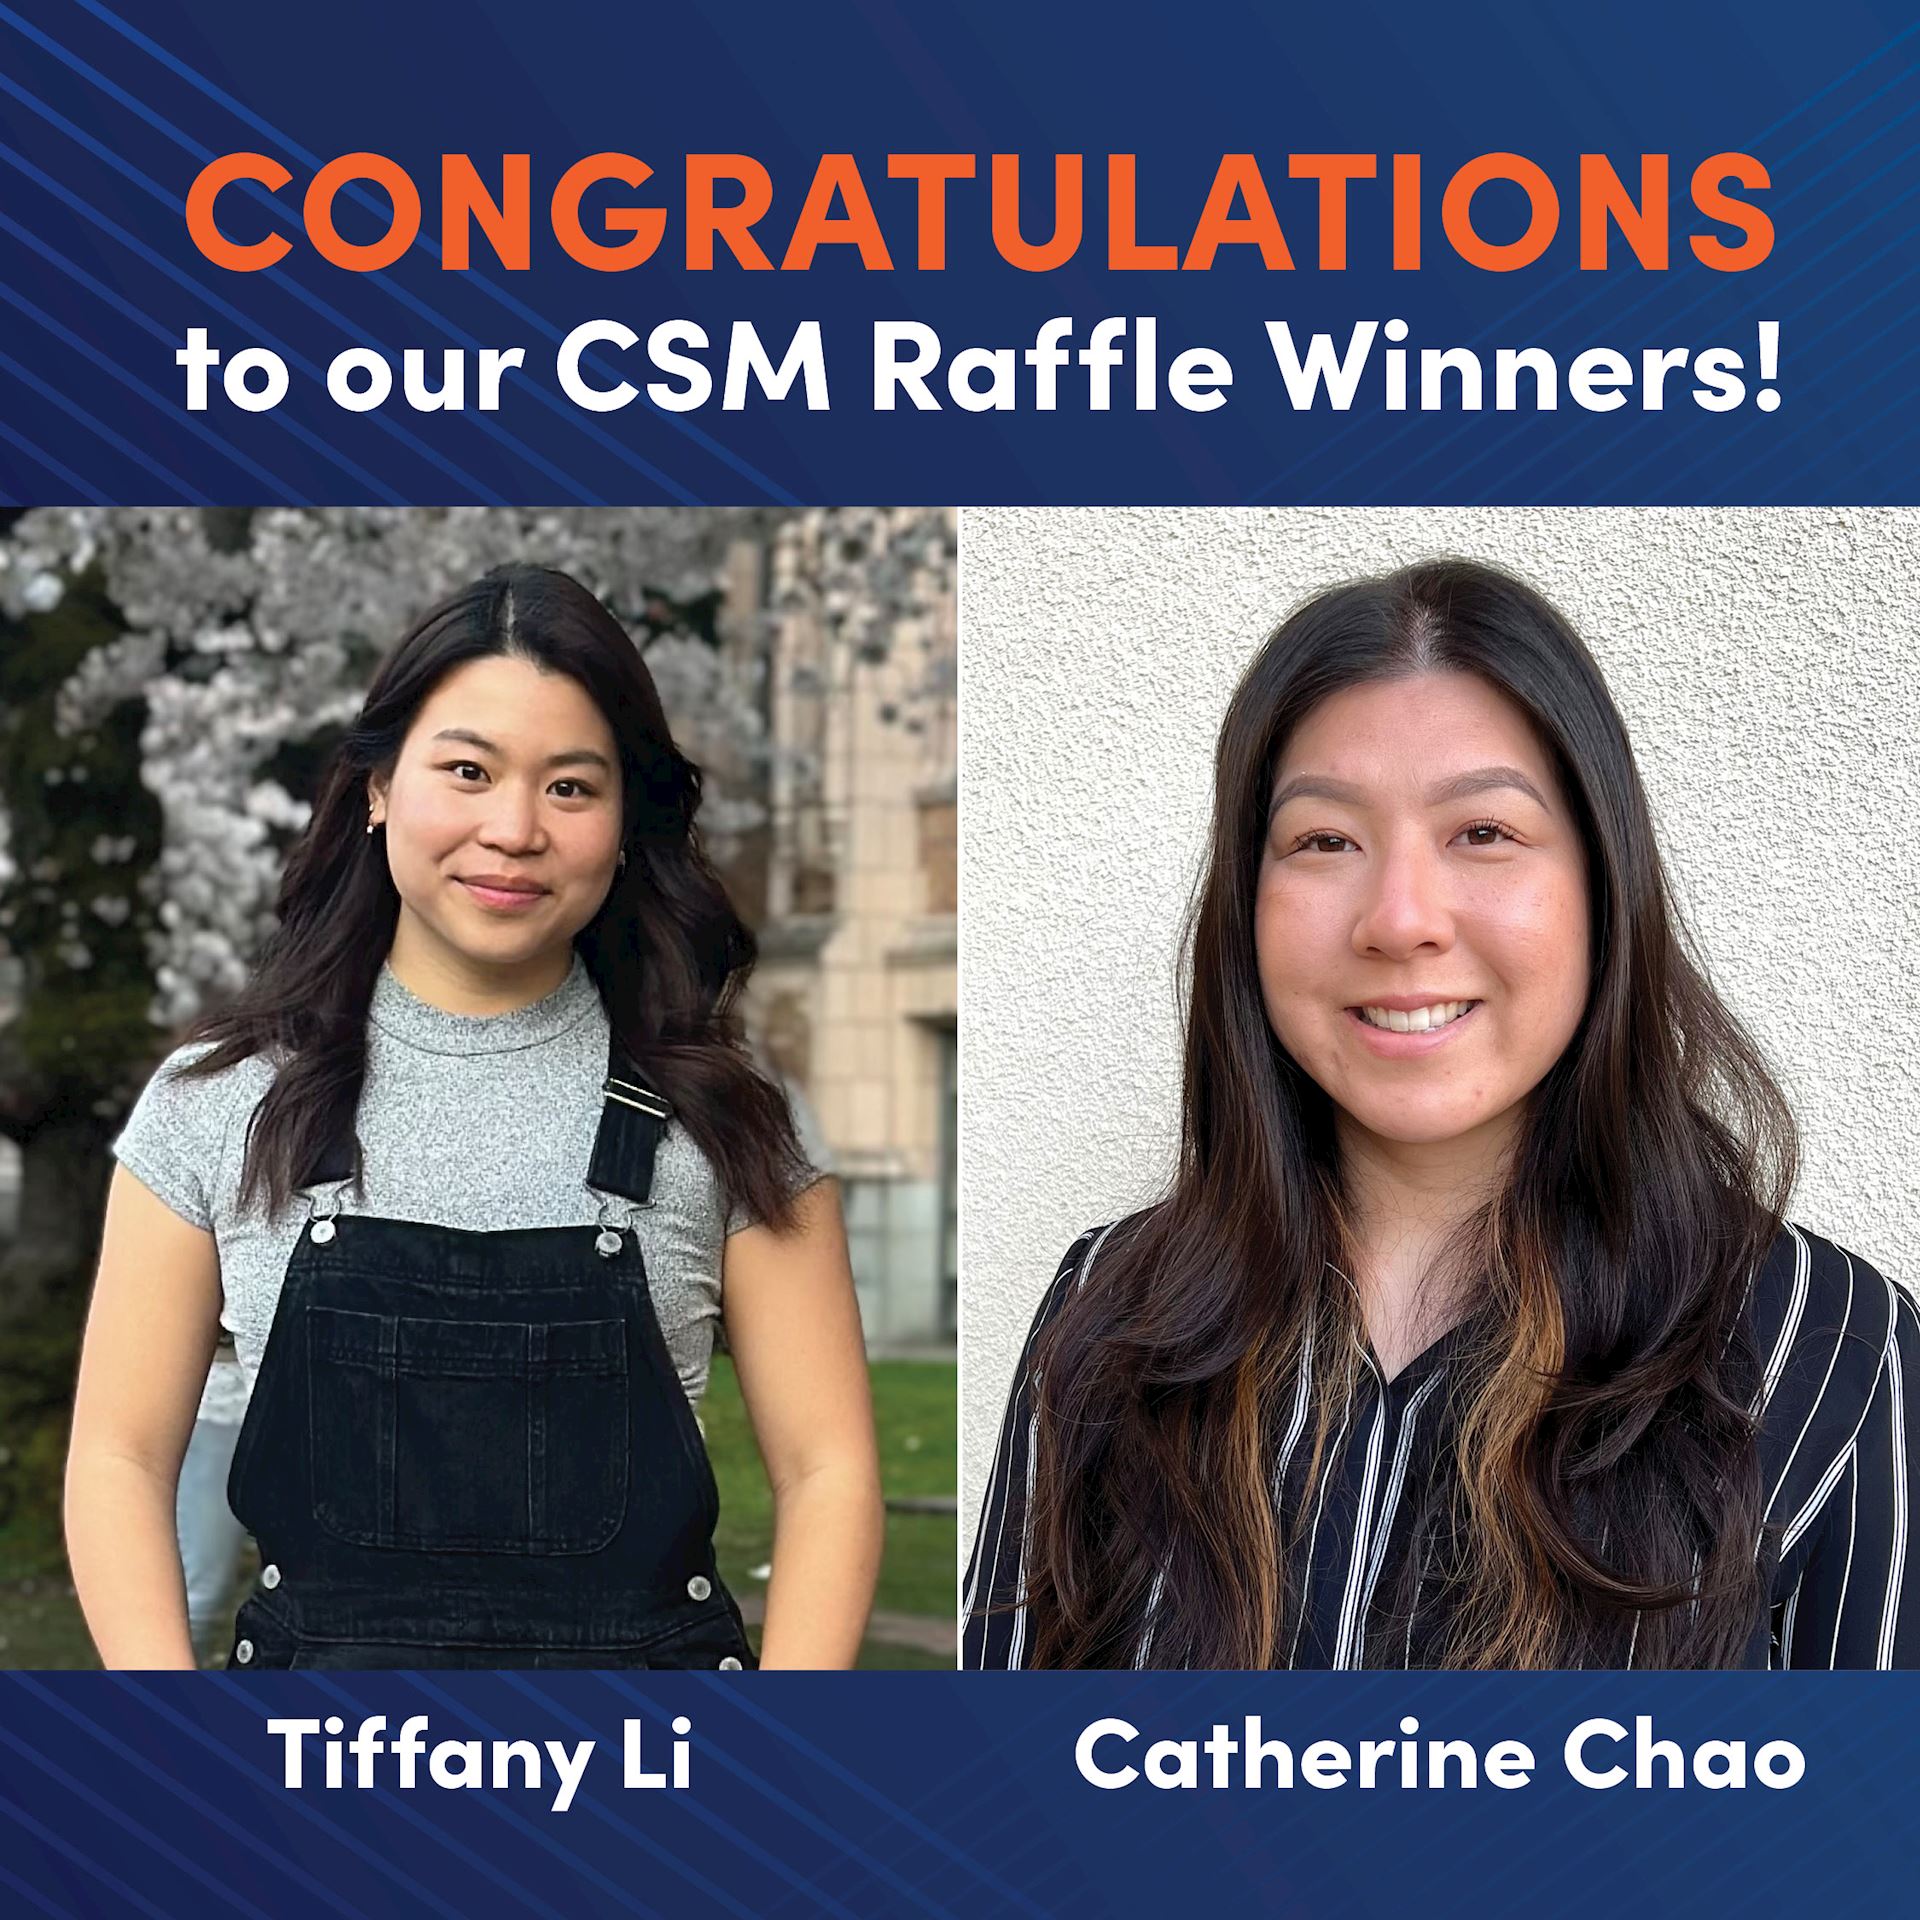 Read more about Journey to Excellence with Tiffany and Catherine – Inspiring Stories of our CSM Raffle Winners